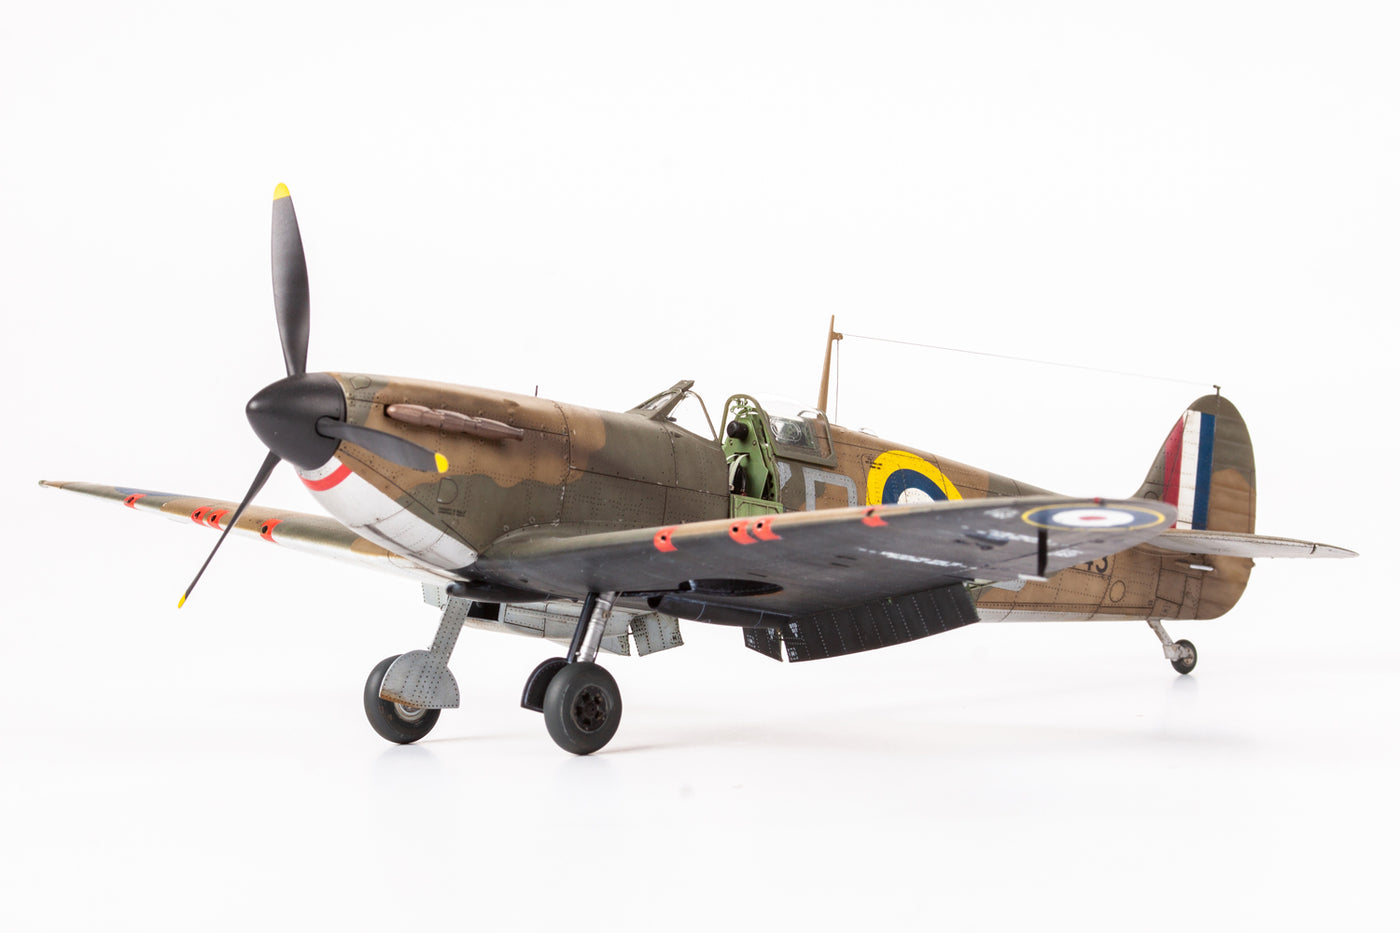 11143 1/48 British WWII Spitfire Mk.I THE SPITFIRE STORY Limited edition